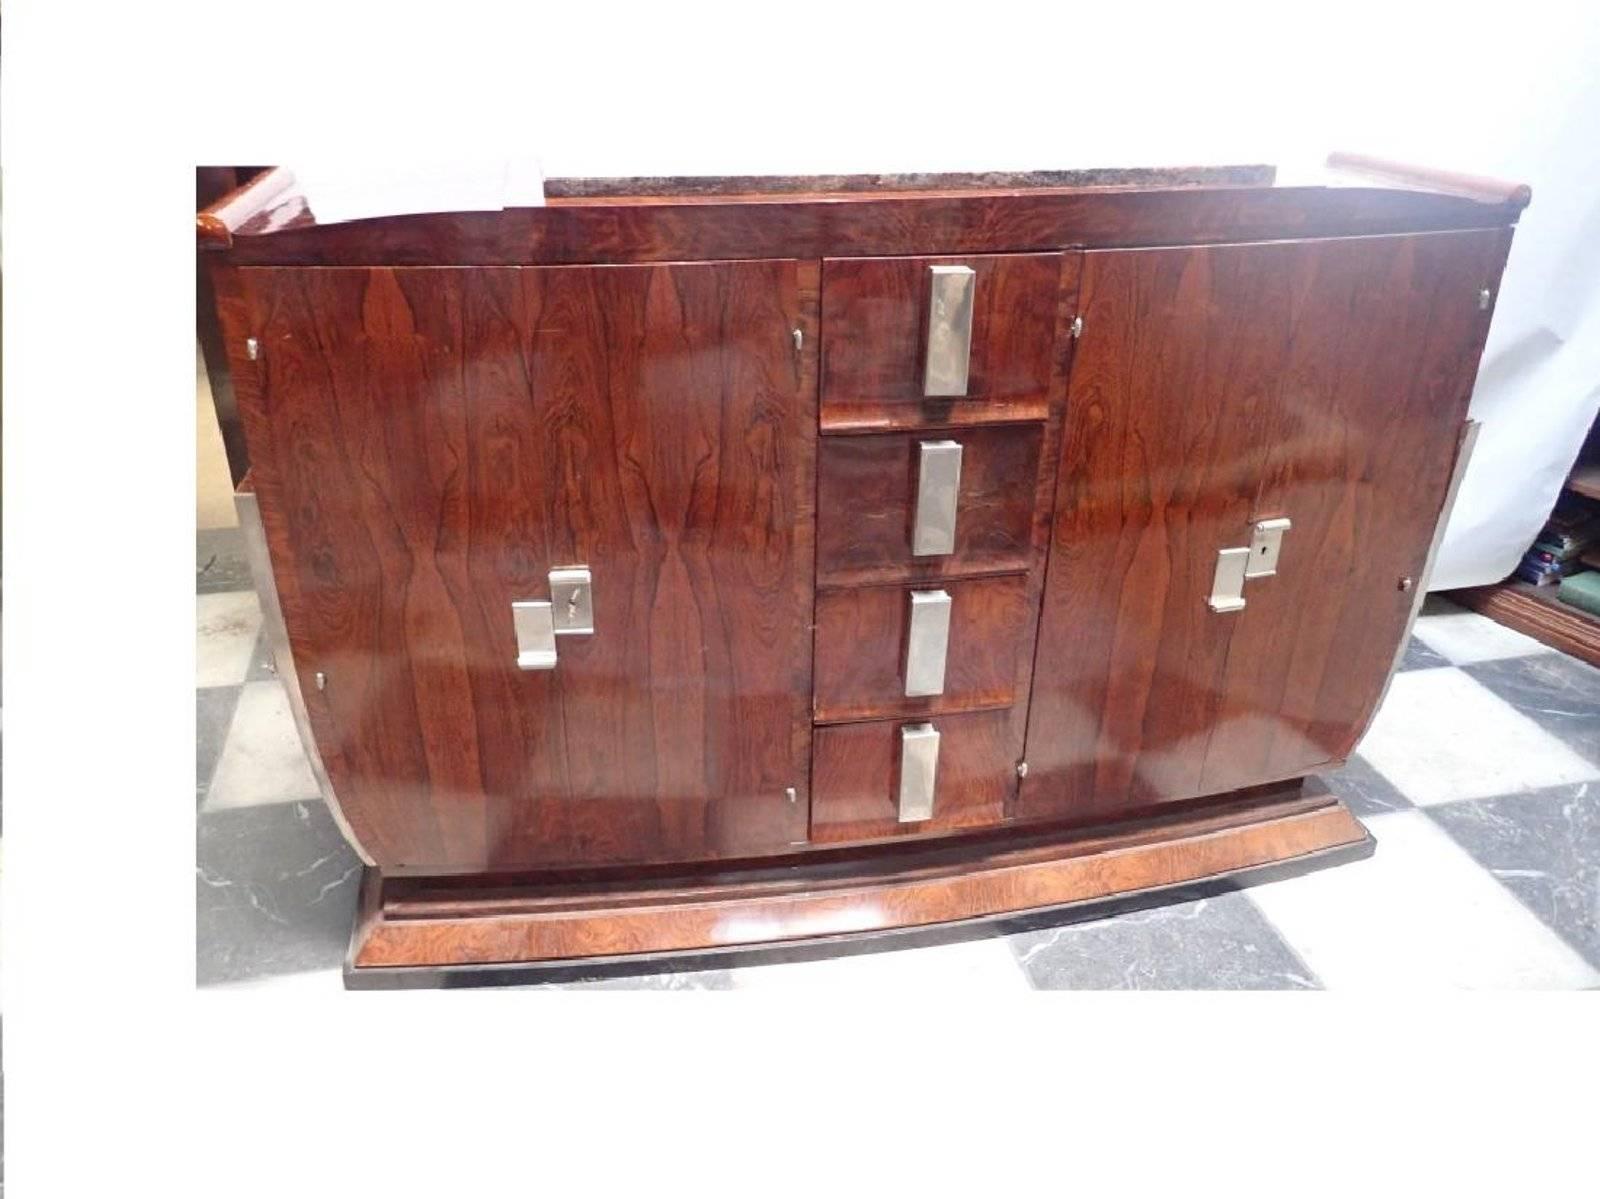 A wonderful and unusual U-shaped body, this 1930s French Art Deco buffet has match veneered rosewood.
The centre has four vertical drawers flanked by two doors with two interior shelves and original Pasquille (long bar locks)

Measure: 72